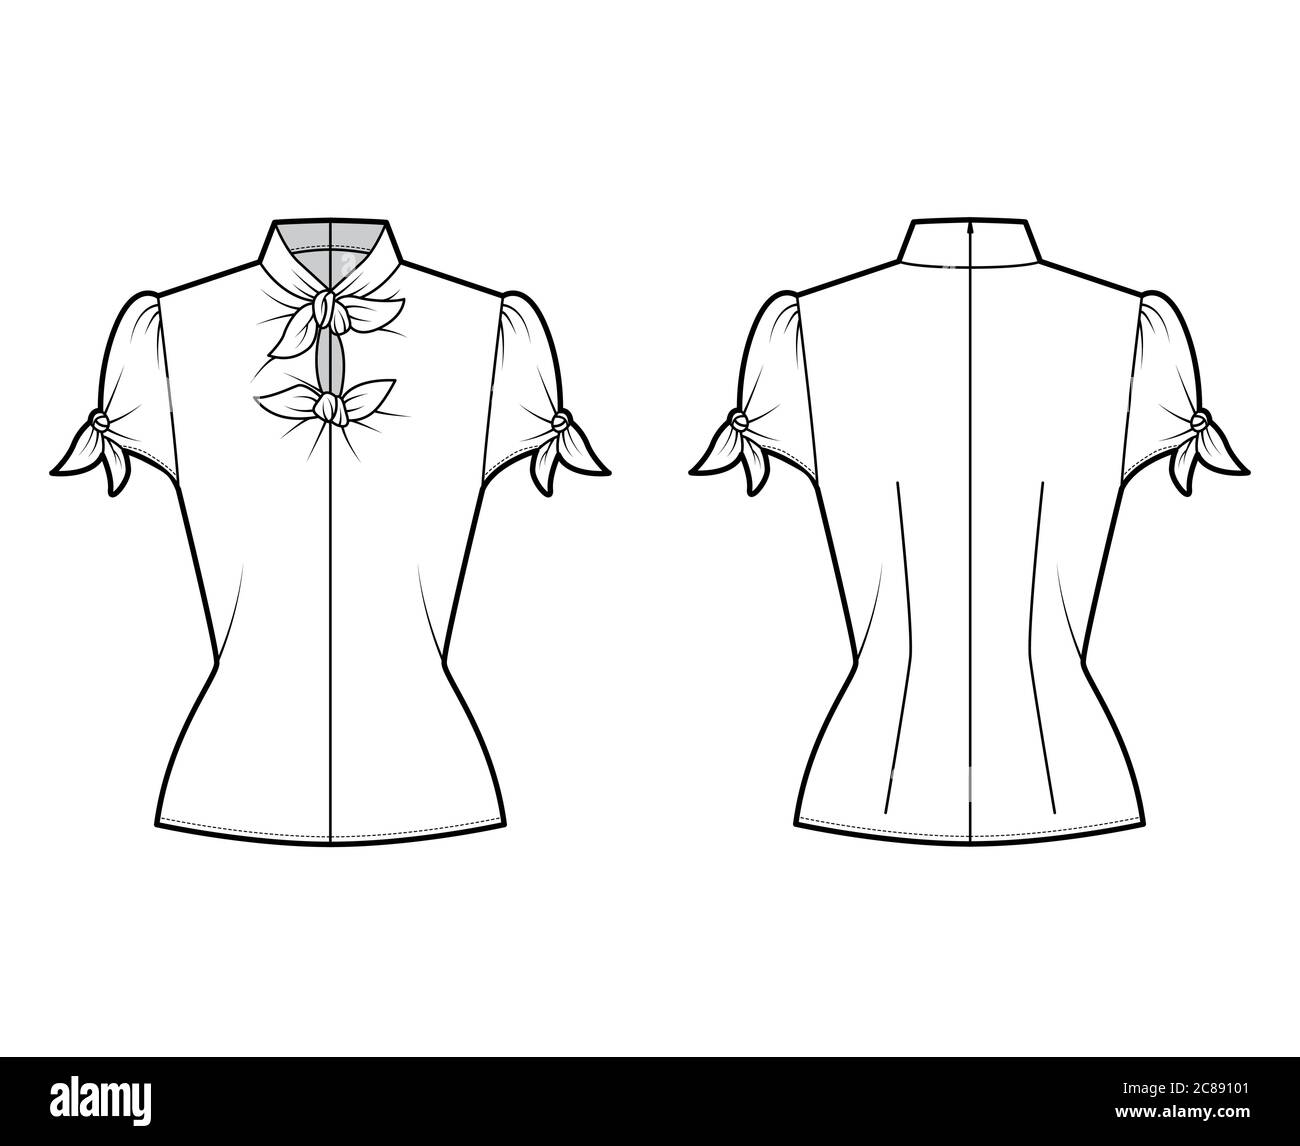 Knotted cutout blouse technical fashion illustration with high neckline, puffed volume sleeves, back zip fastening. Flat apparel template front, back white color. Women men unisex garment CAD mockup Stock Vector